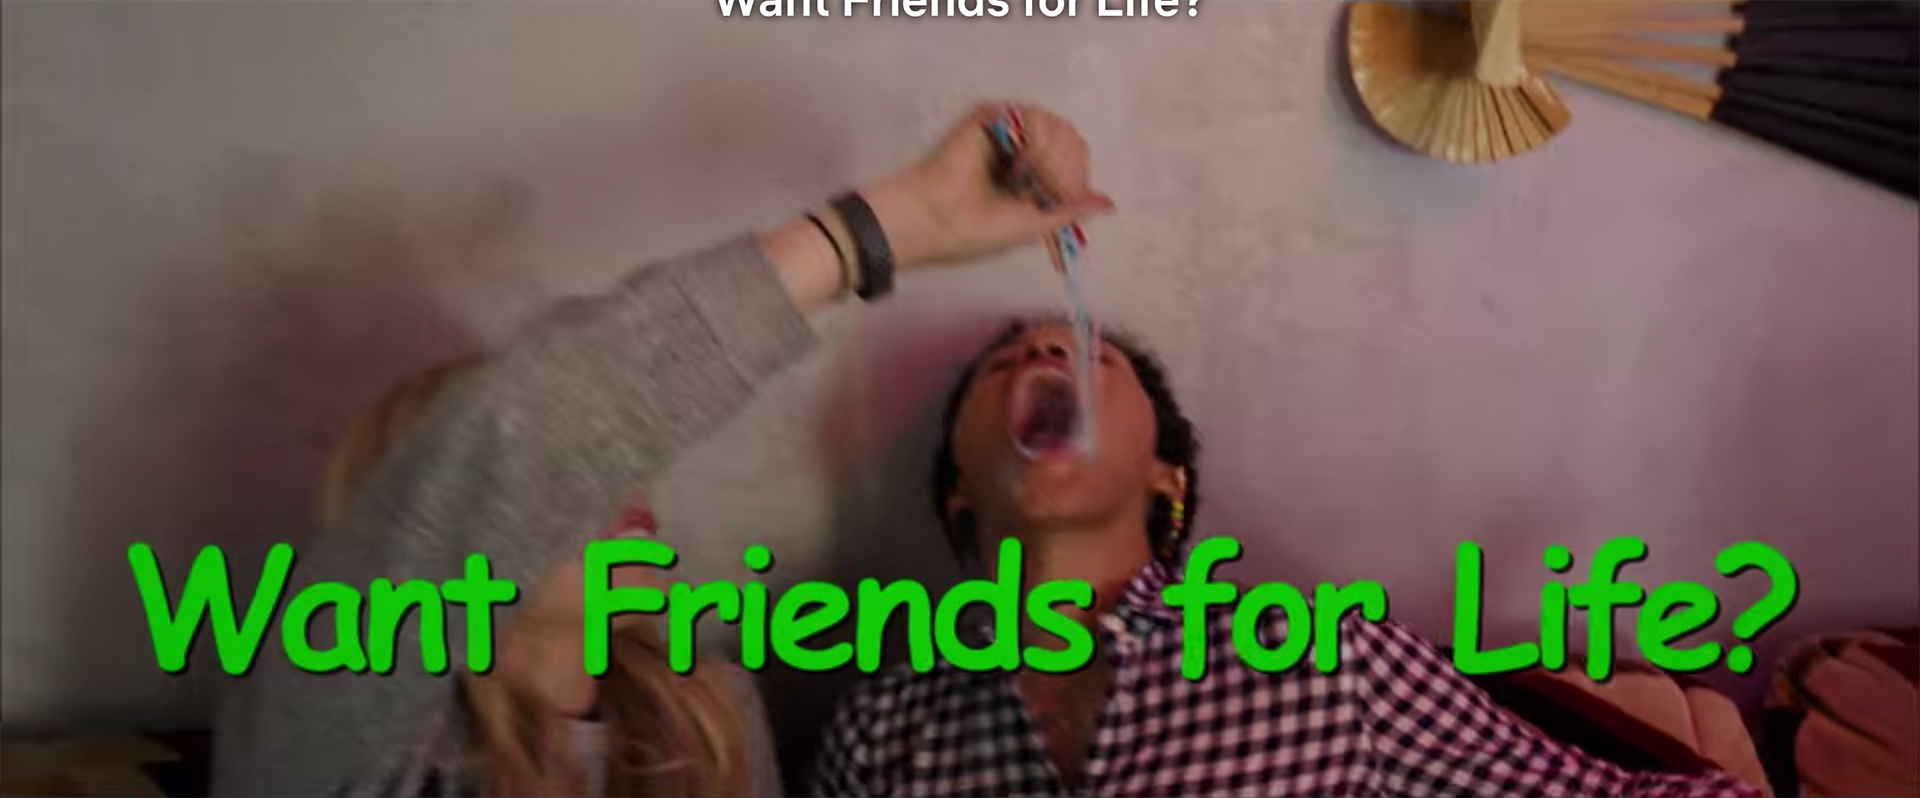 Want Friends for Life?